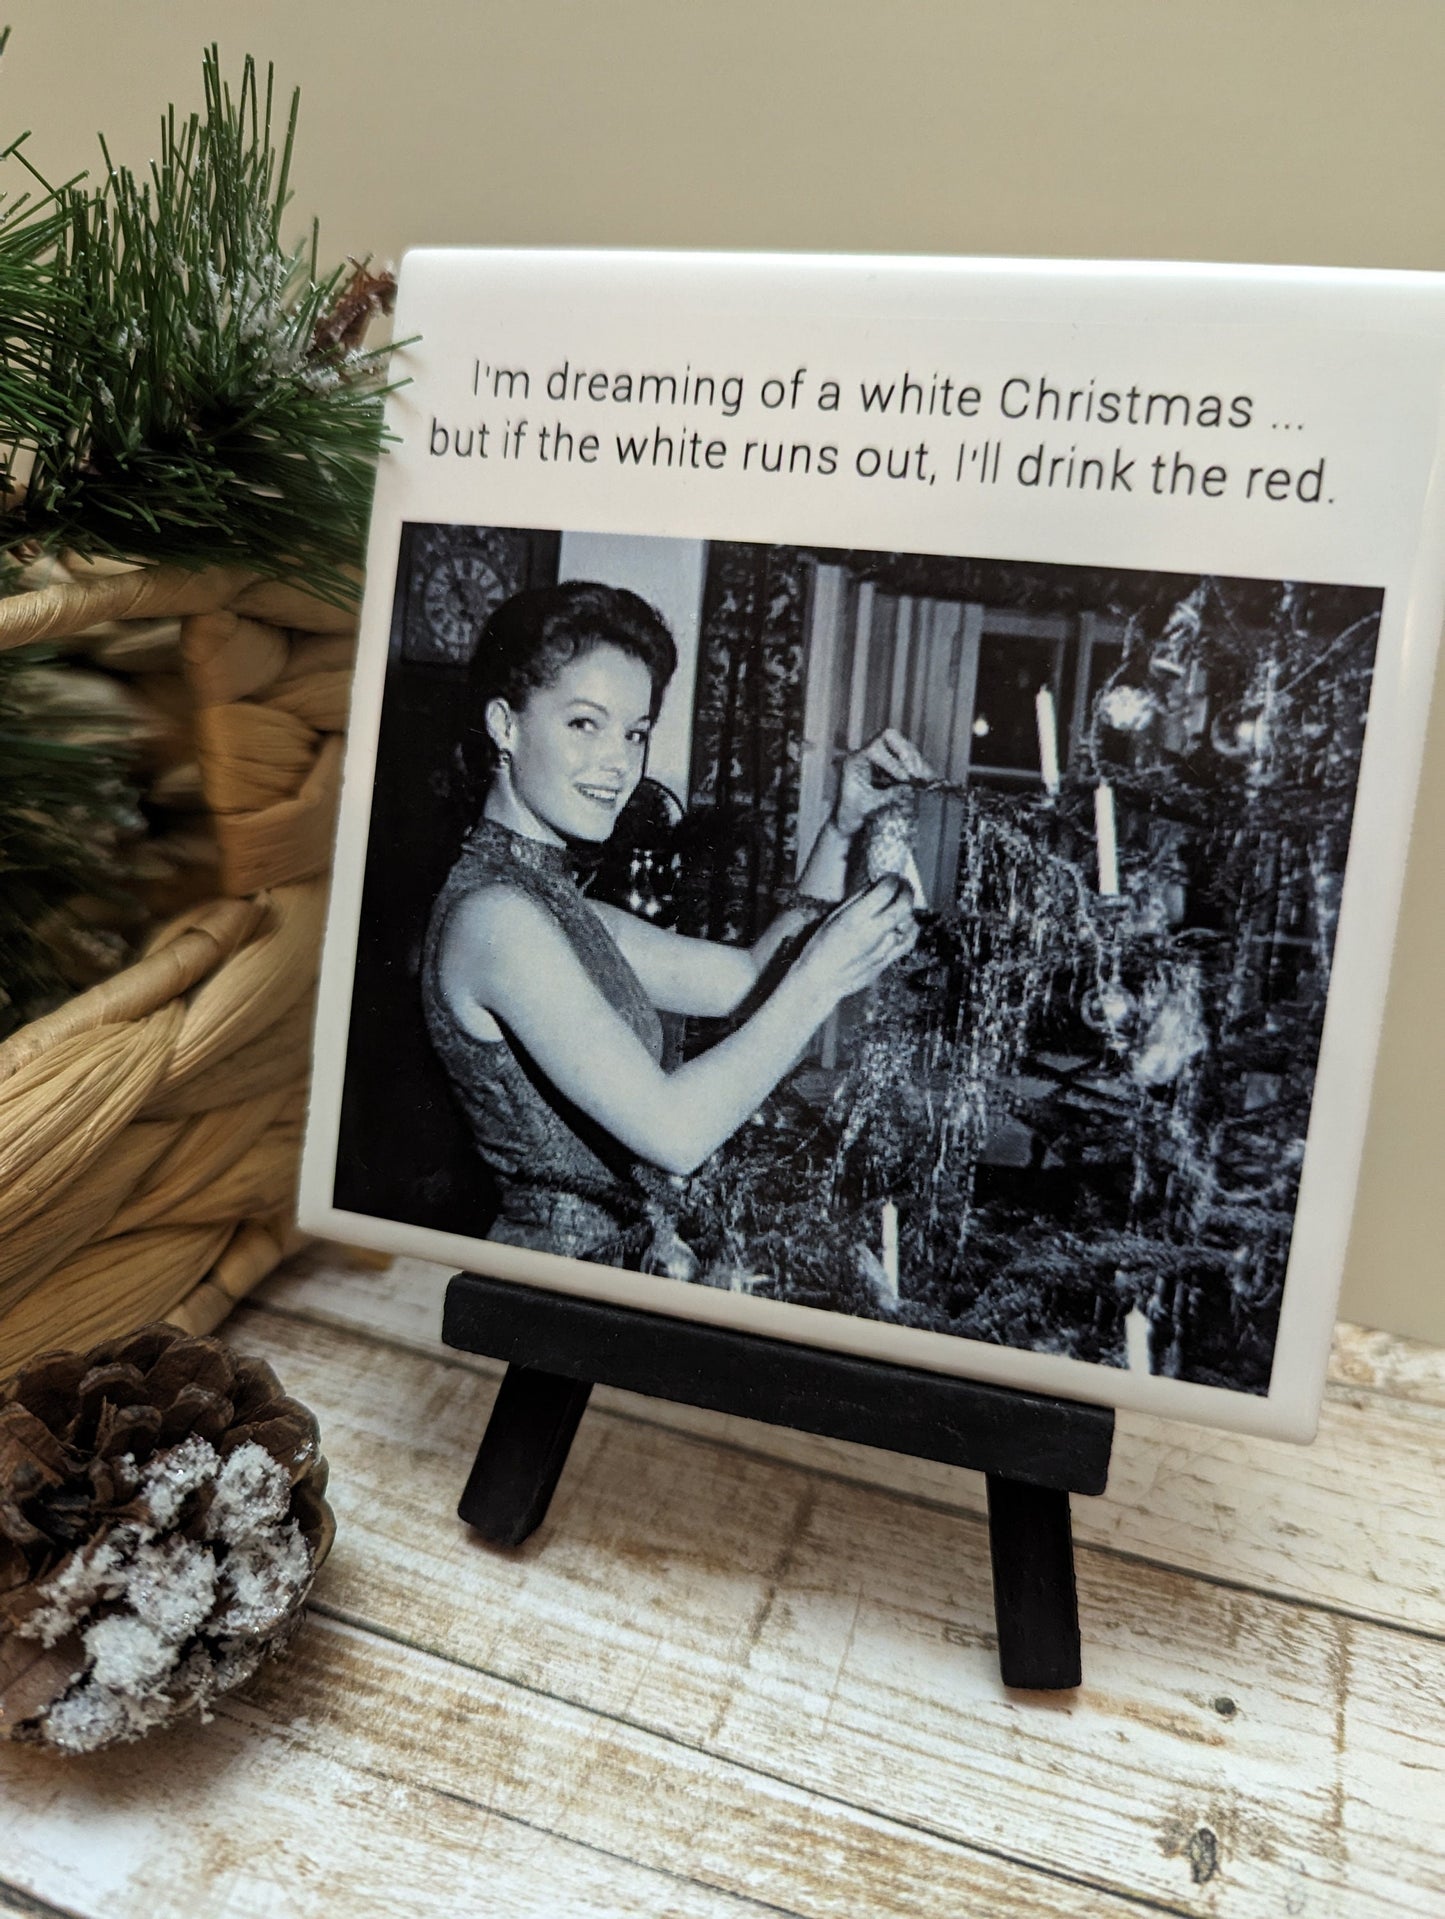 Funny Snarky Holiday Mini Easel Signs, funny signs, easel sign, tile sign - easel included, your color choice